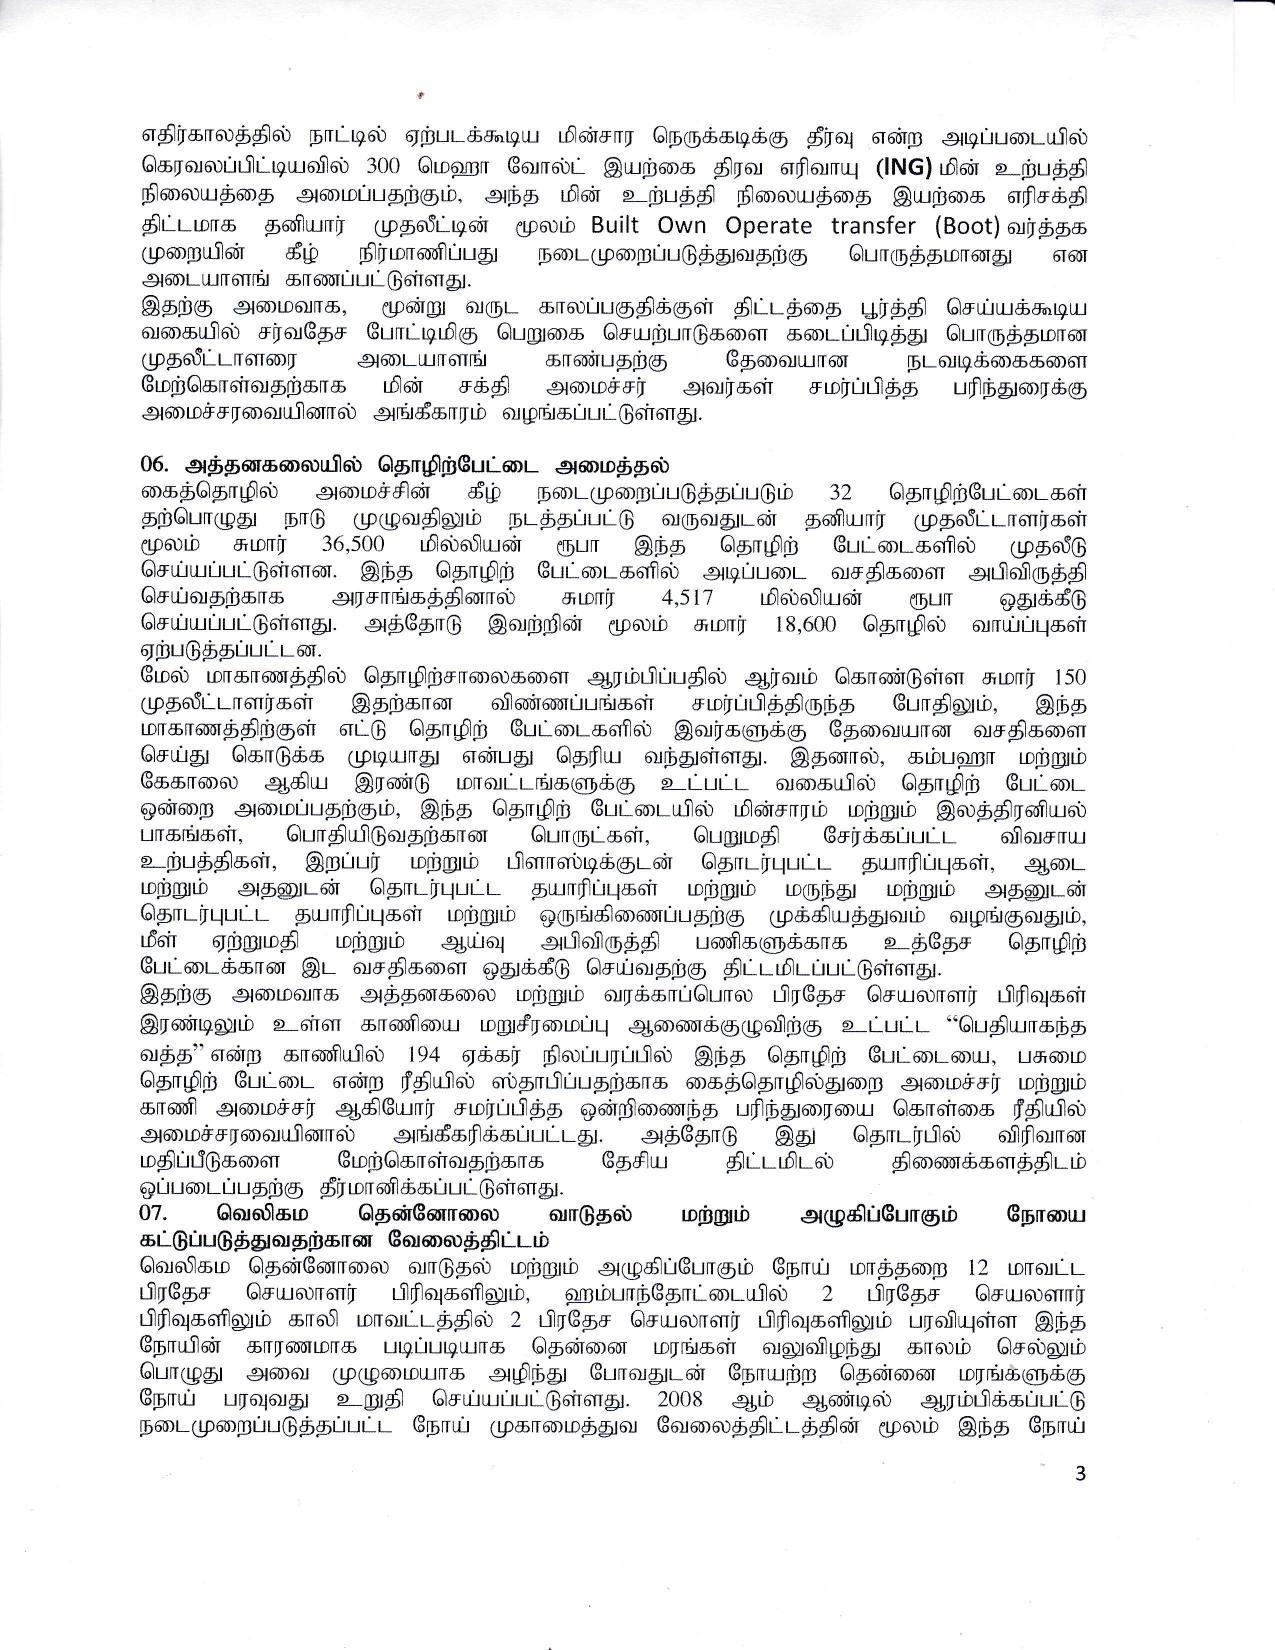 Cabinet Decision on 16.09.2020 0 Tamil 1 page 003